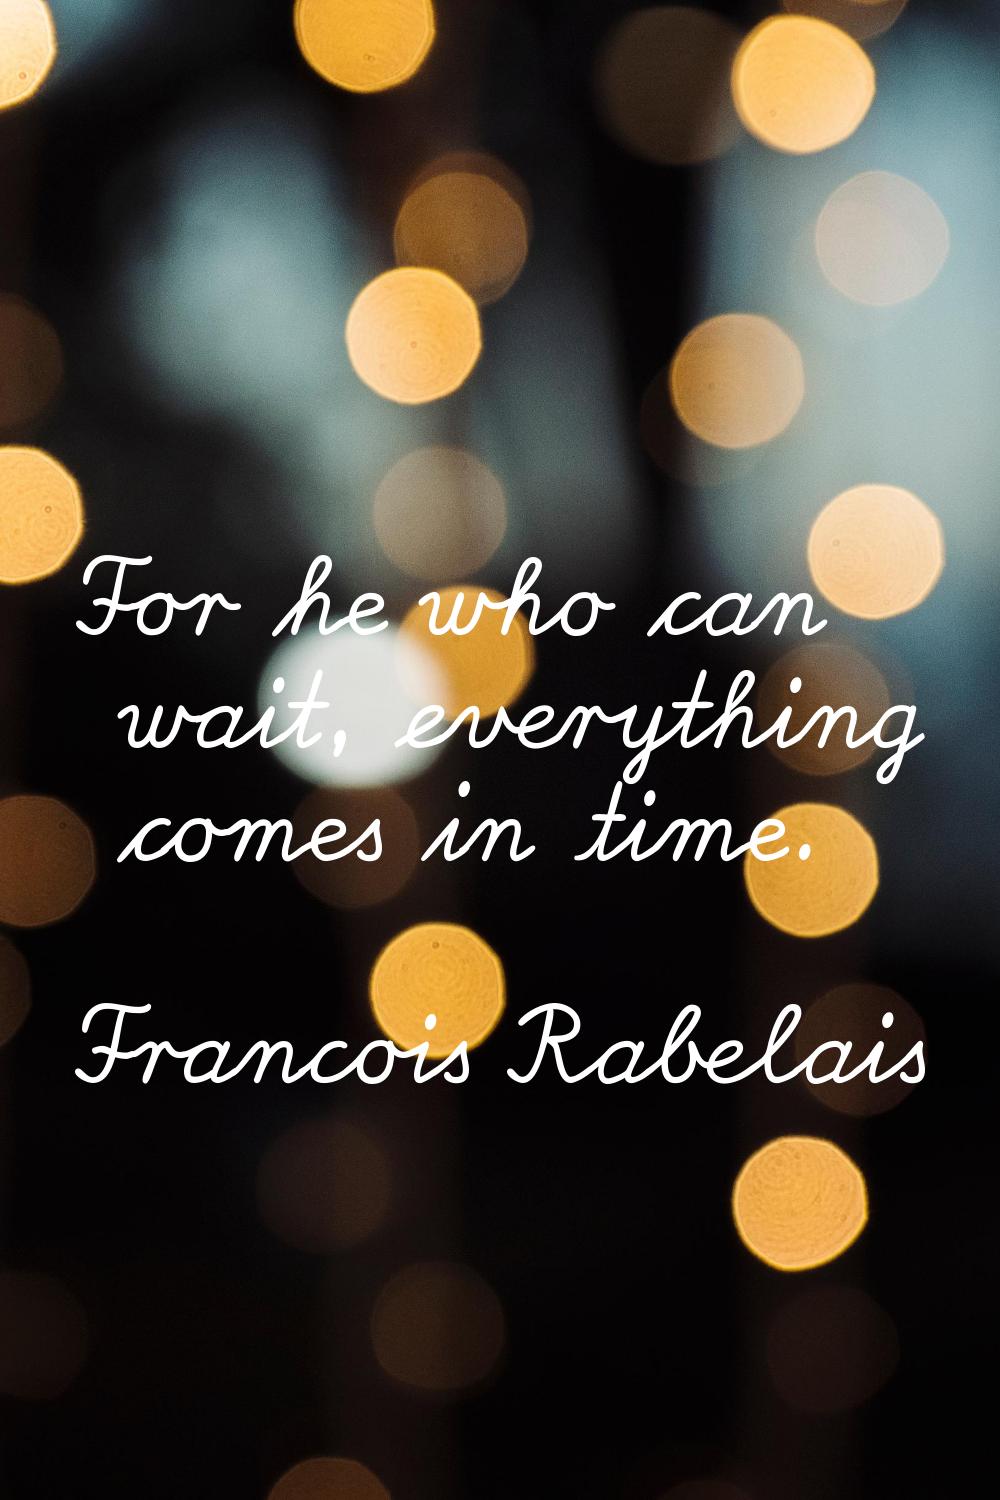 For he who can wait, everything comes in time.